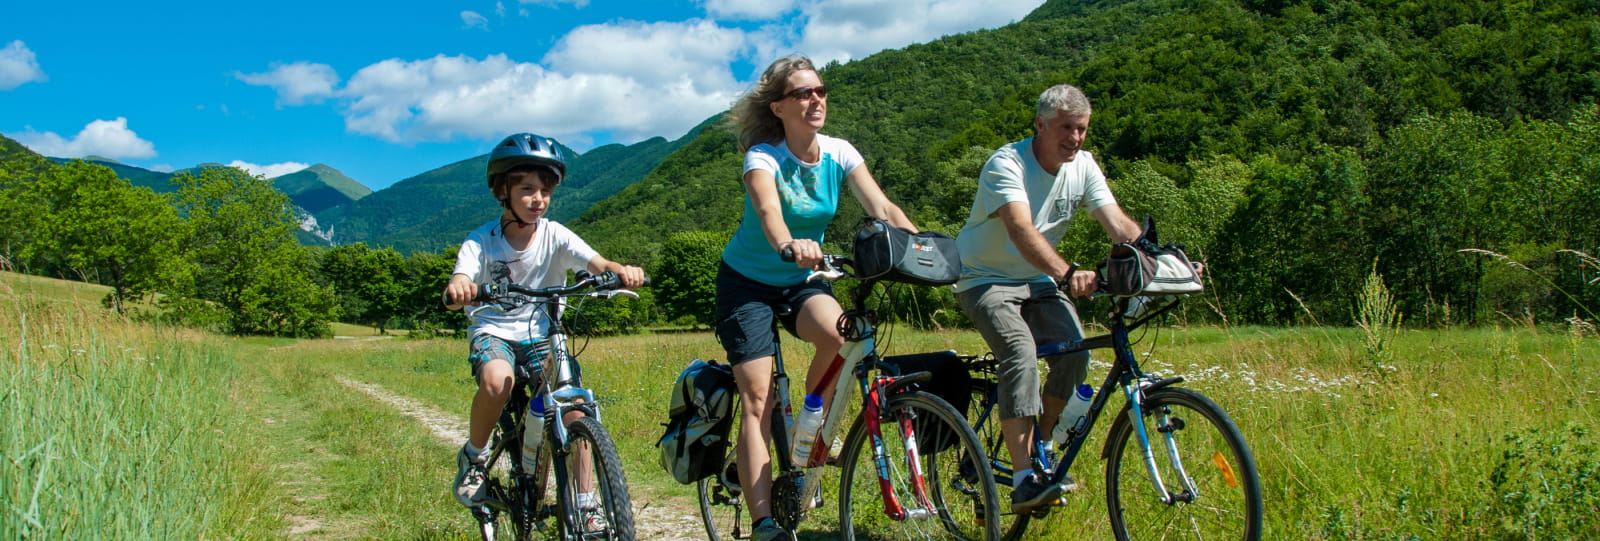 Cycling: a bicycle ride in family along the river Drôme